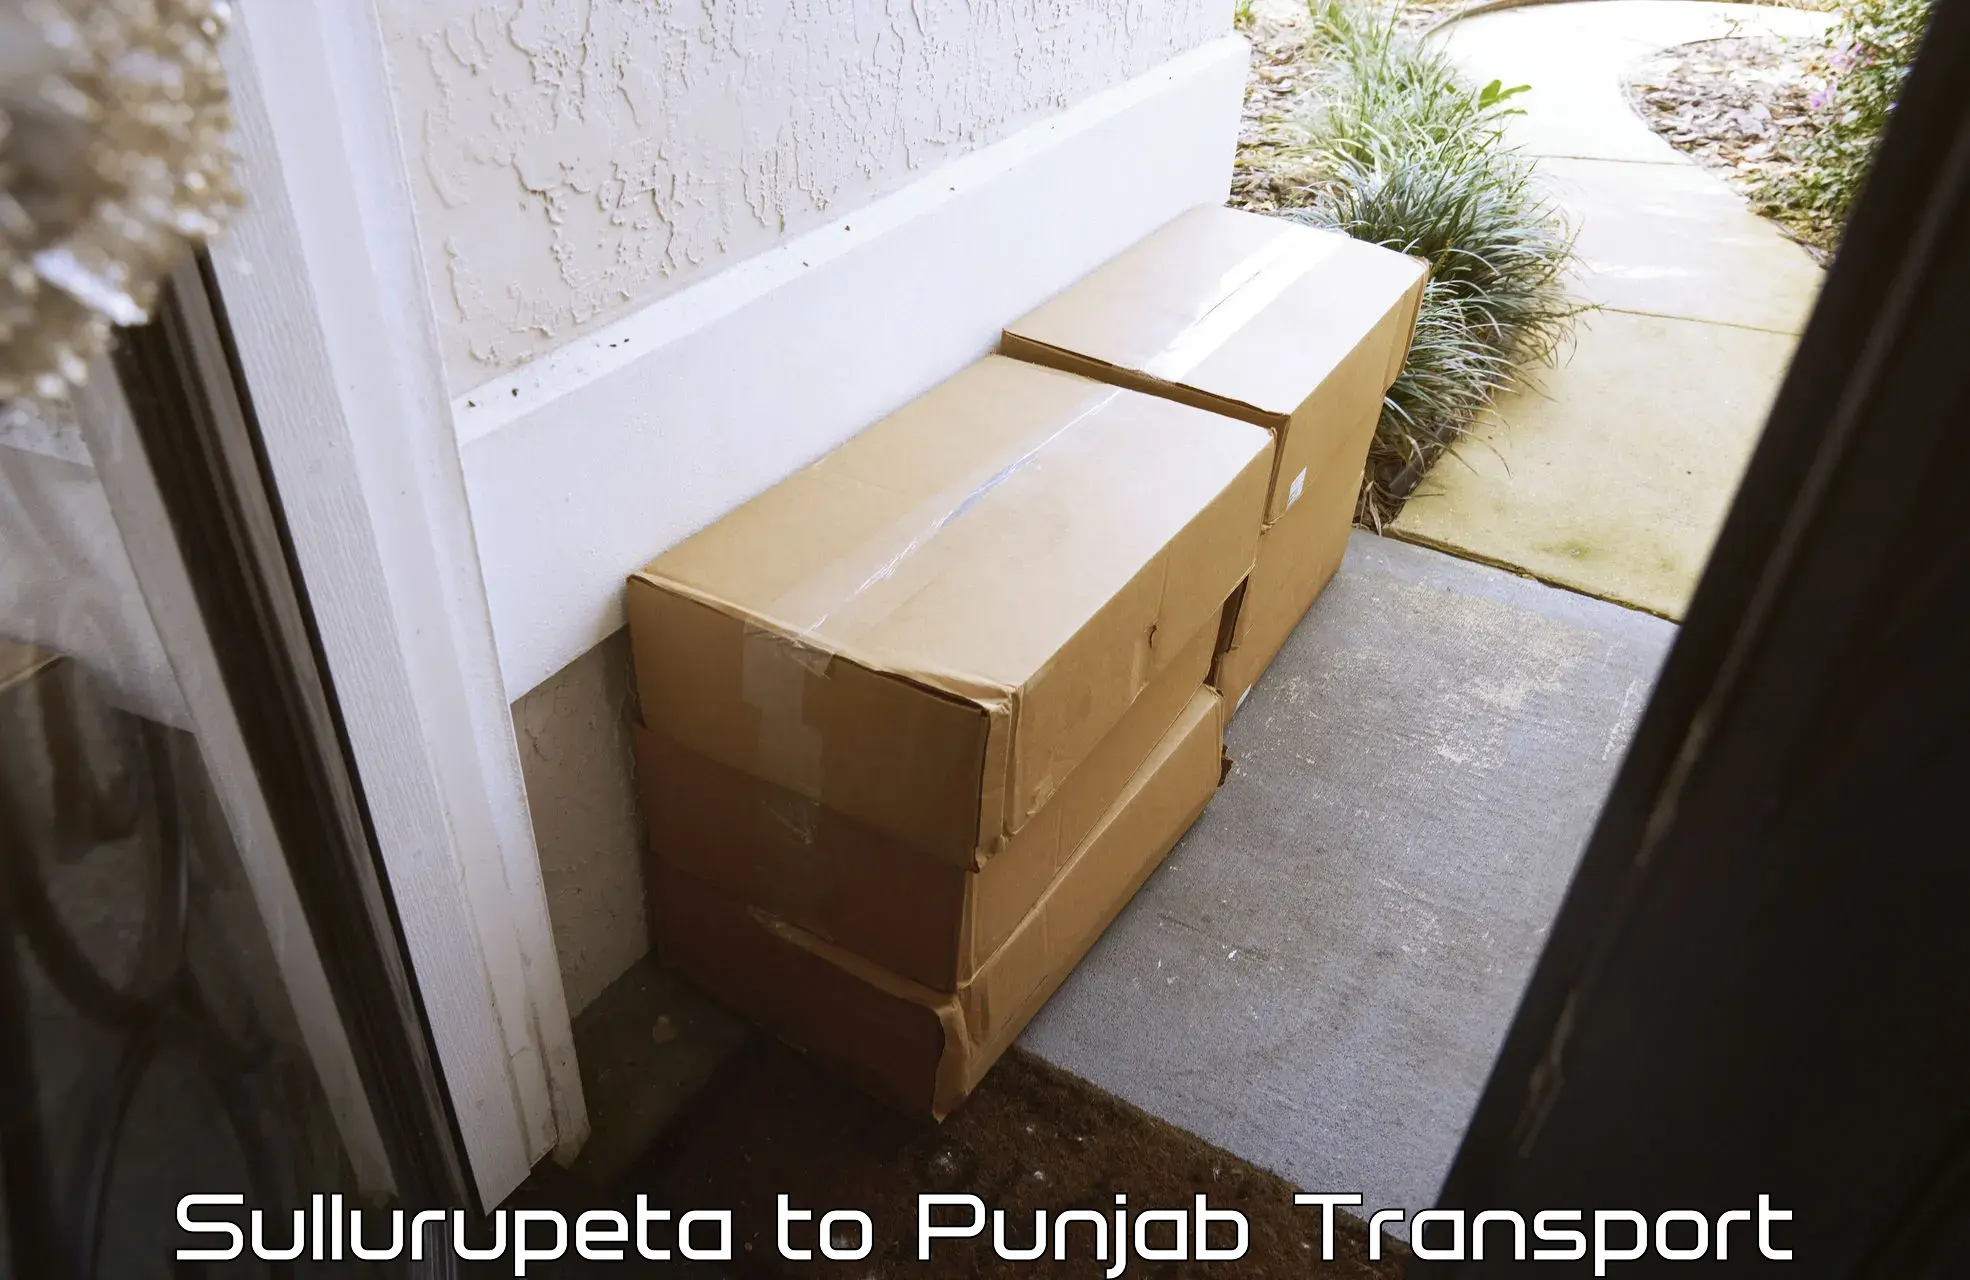 Transport bike from one state to another Sullurupeta to Punjab